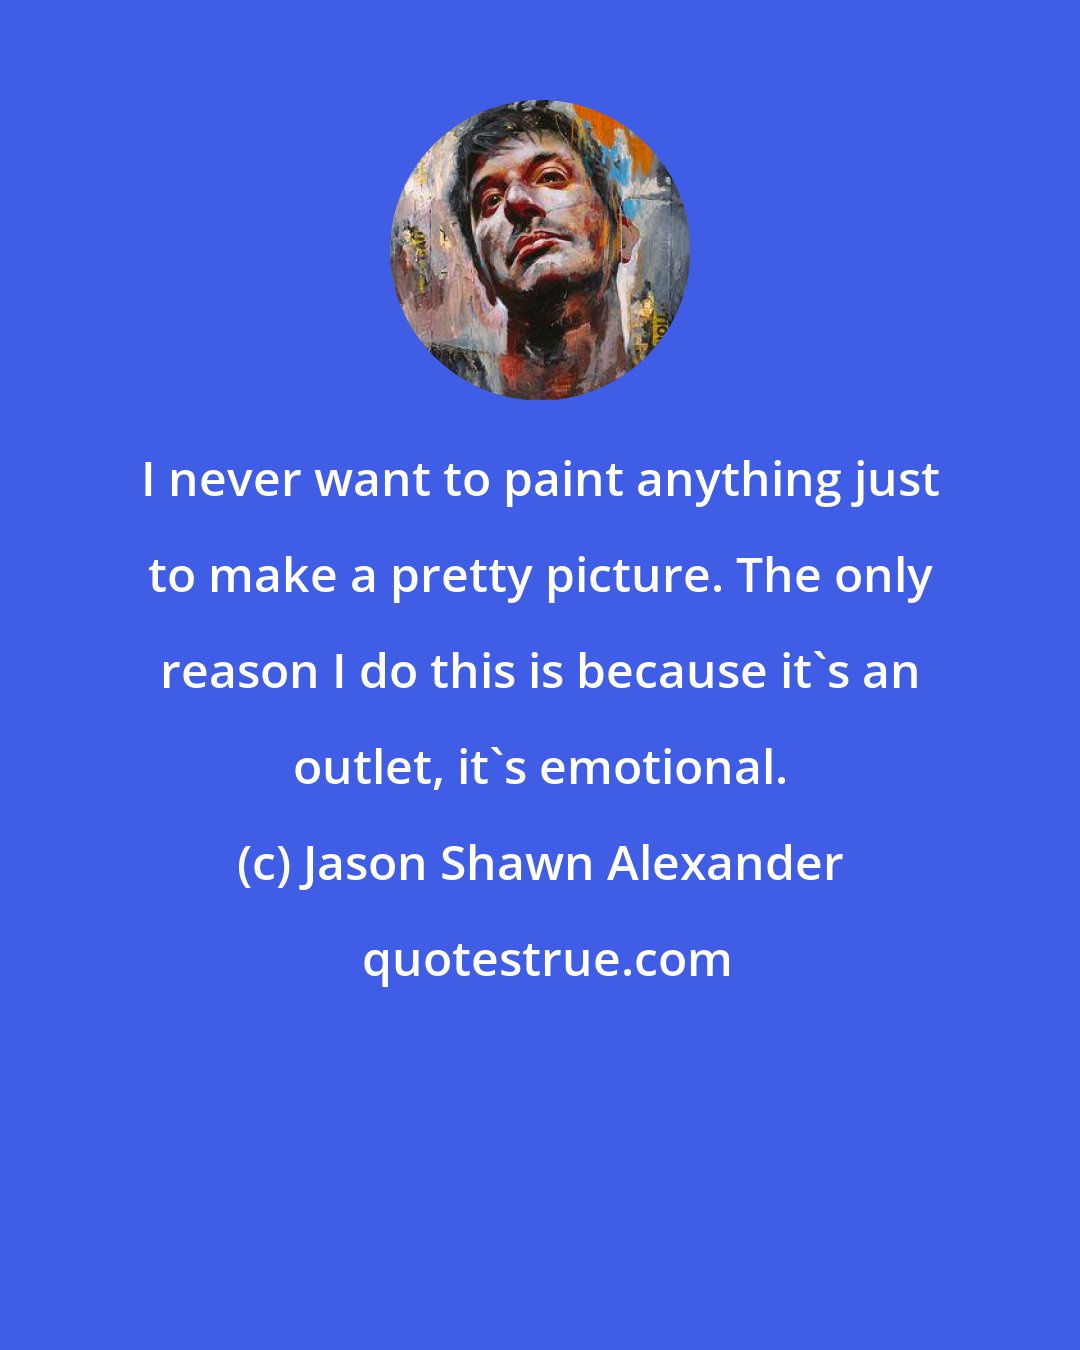 Jason Shawn Alexander: I never want to paint anything just to make a pretty picture. The only reason I do this is because it's an outlet, it's emotional.